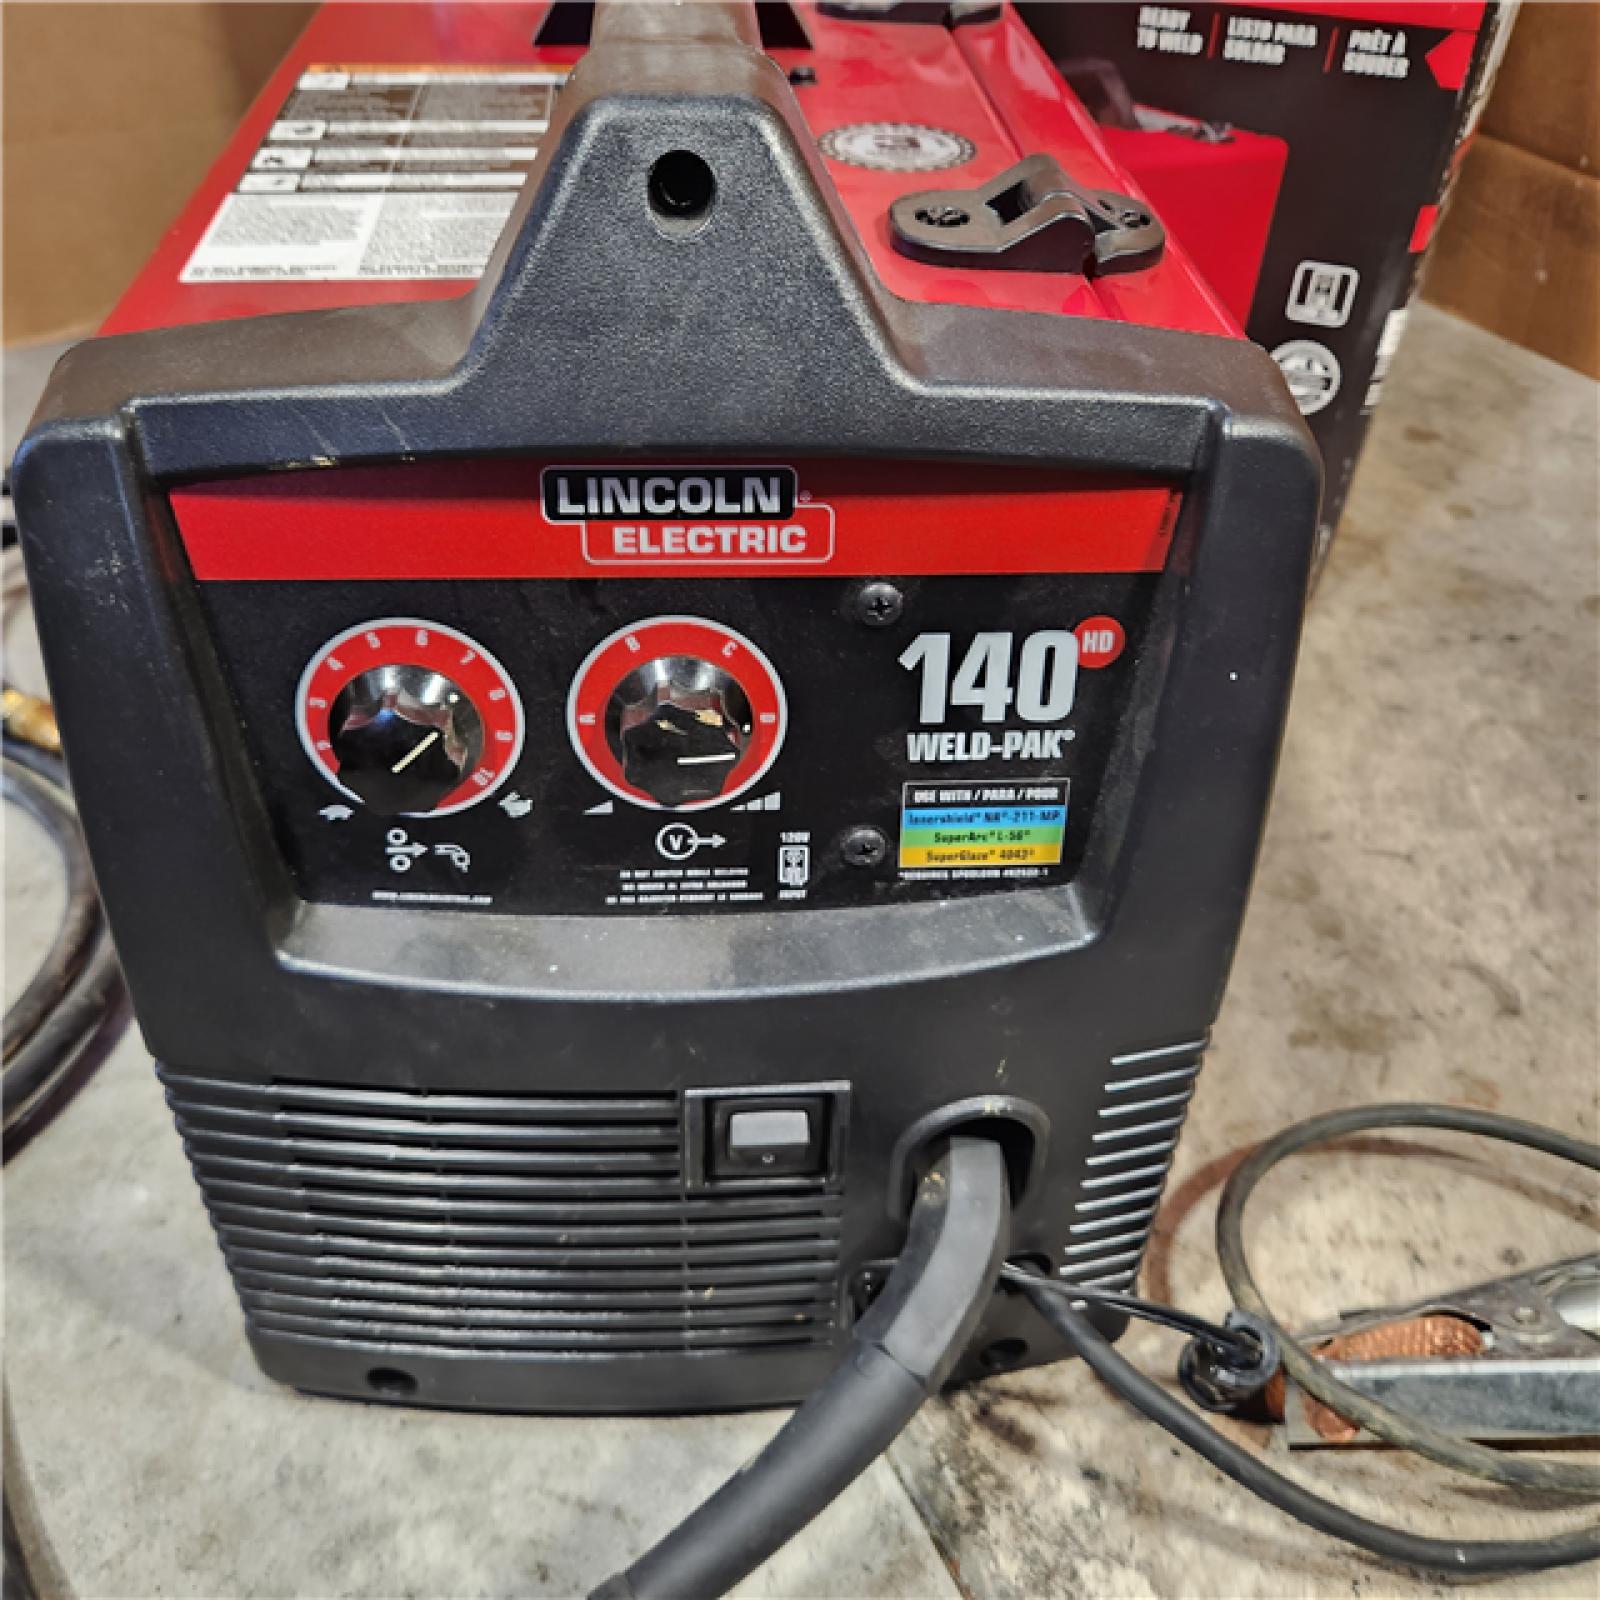 Houston Location - AS-IS Lincoln Electric Weld-Pak 140 Amp MIG and Flux-Core Wire Feed Welder, 115V, Aluminum Welder with Spool Gun Sold Separately - Appears IN USED Condition